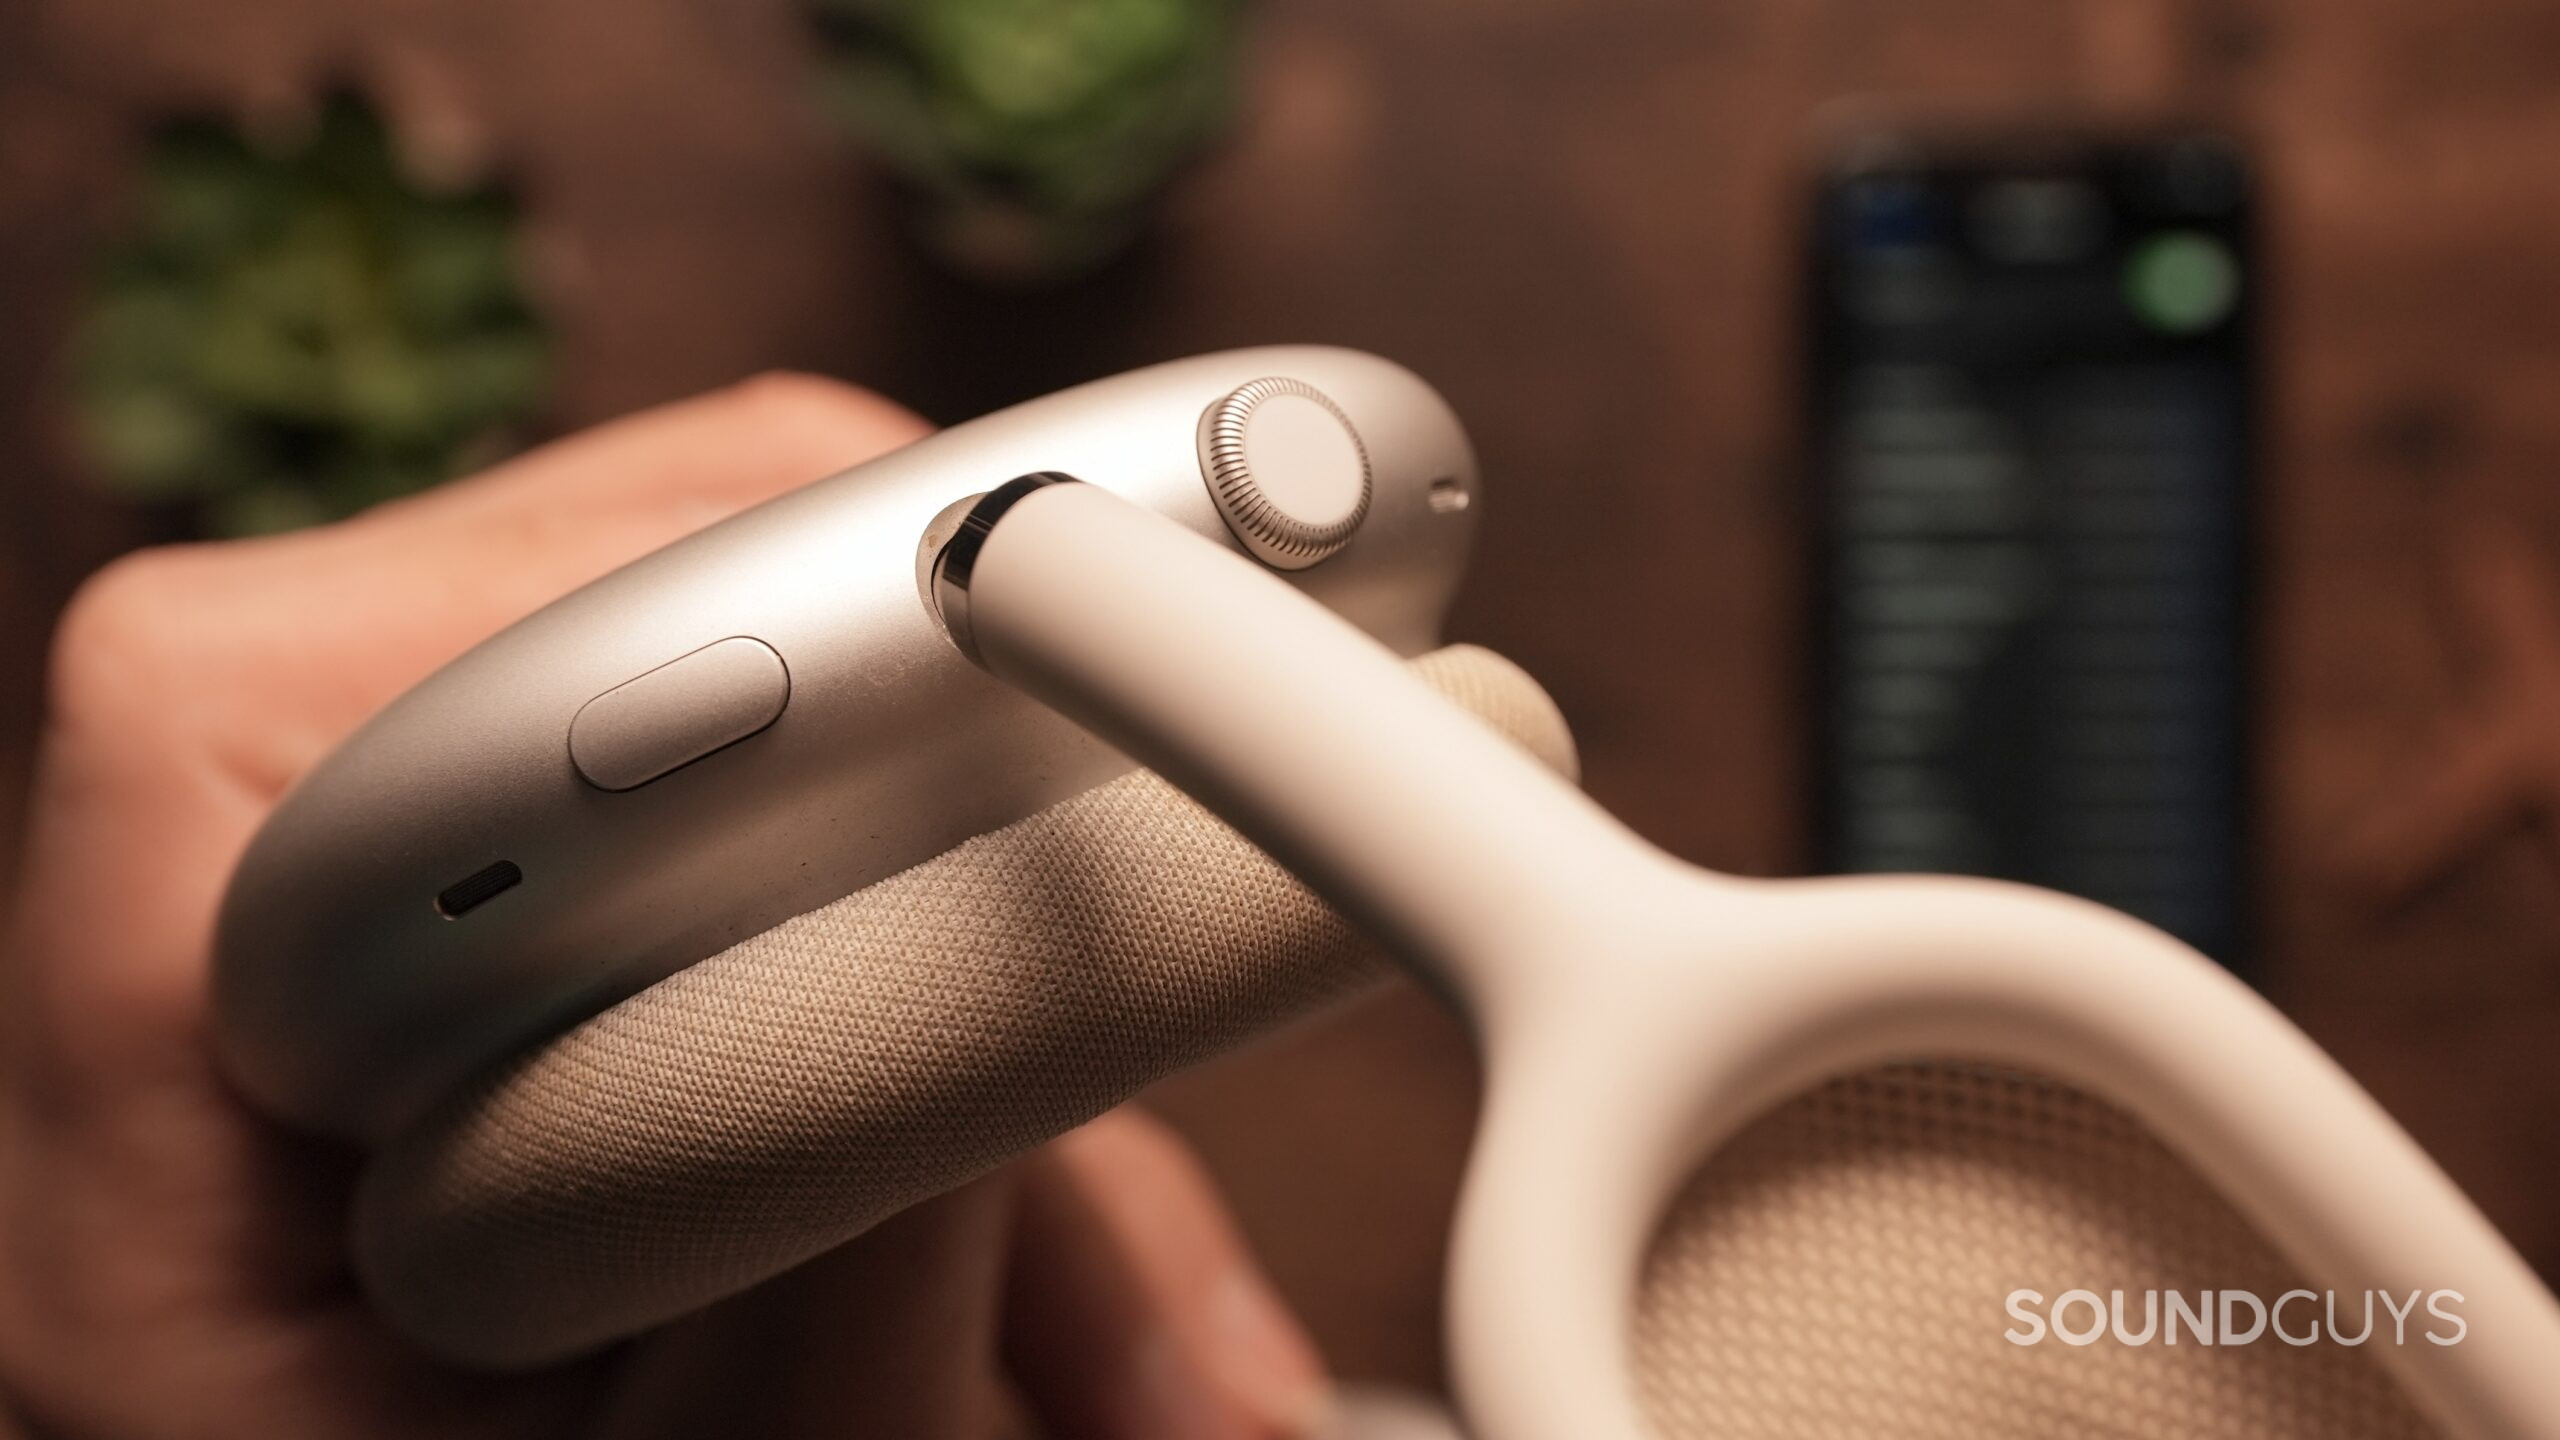 A hand holds an AirPods Max, showing the digital crown and noise control buttons.